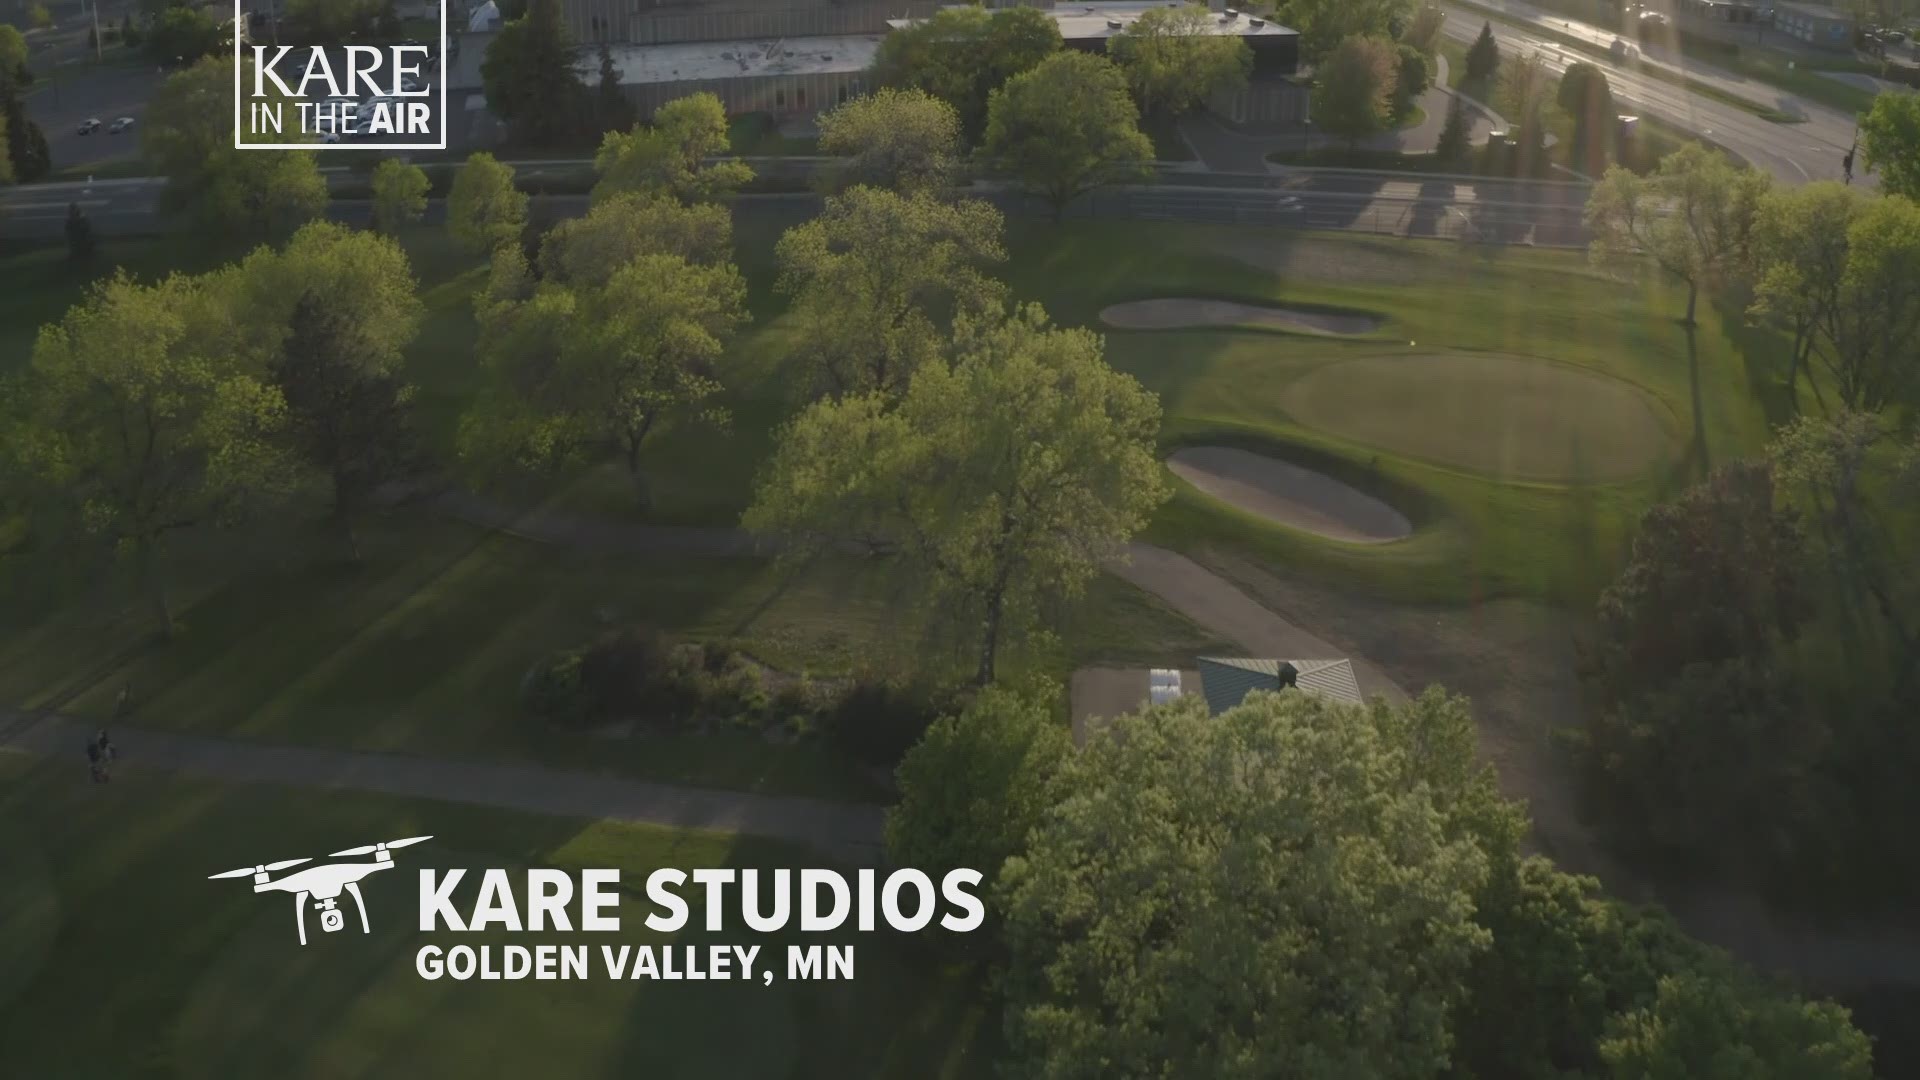 We didn't have to go far to capture the latest location on our summer drone series tour... KARE 11 Studios right here in Golden Valley.